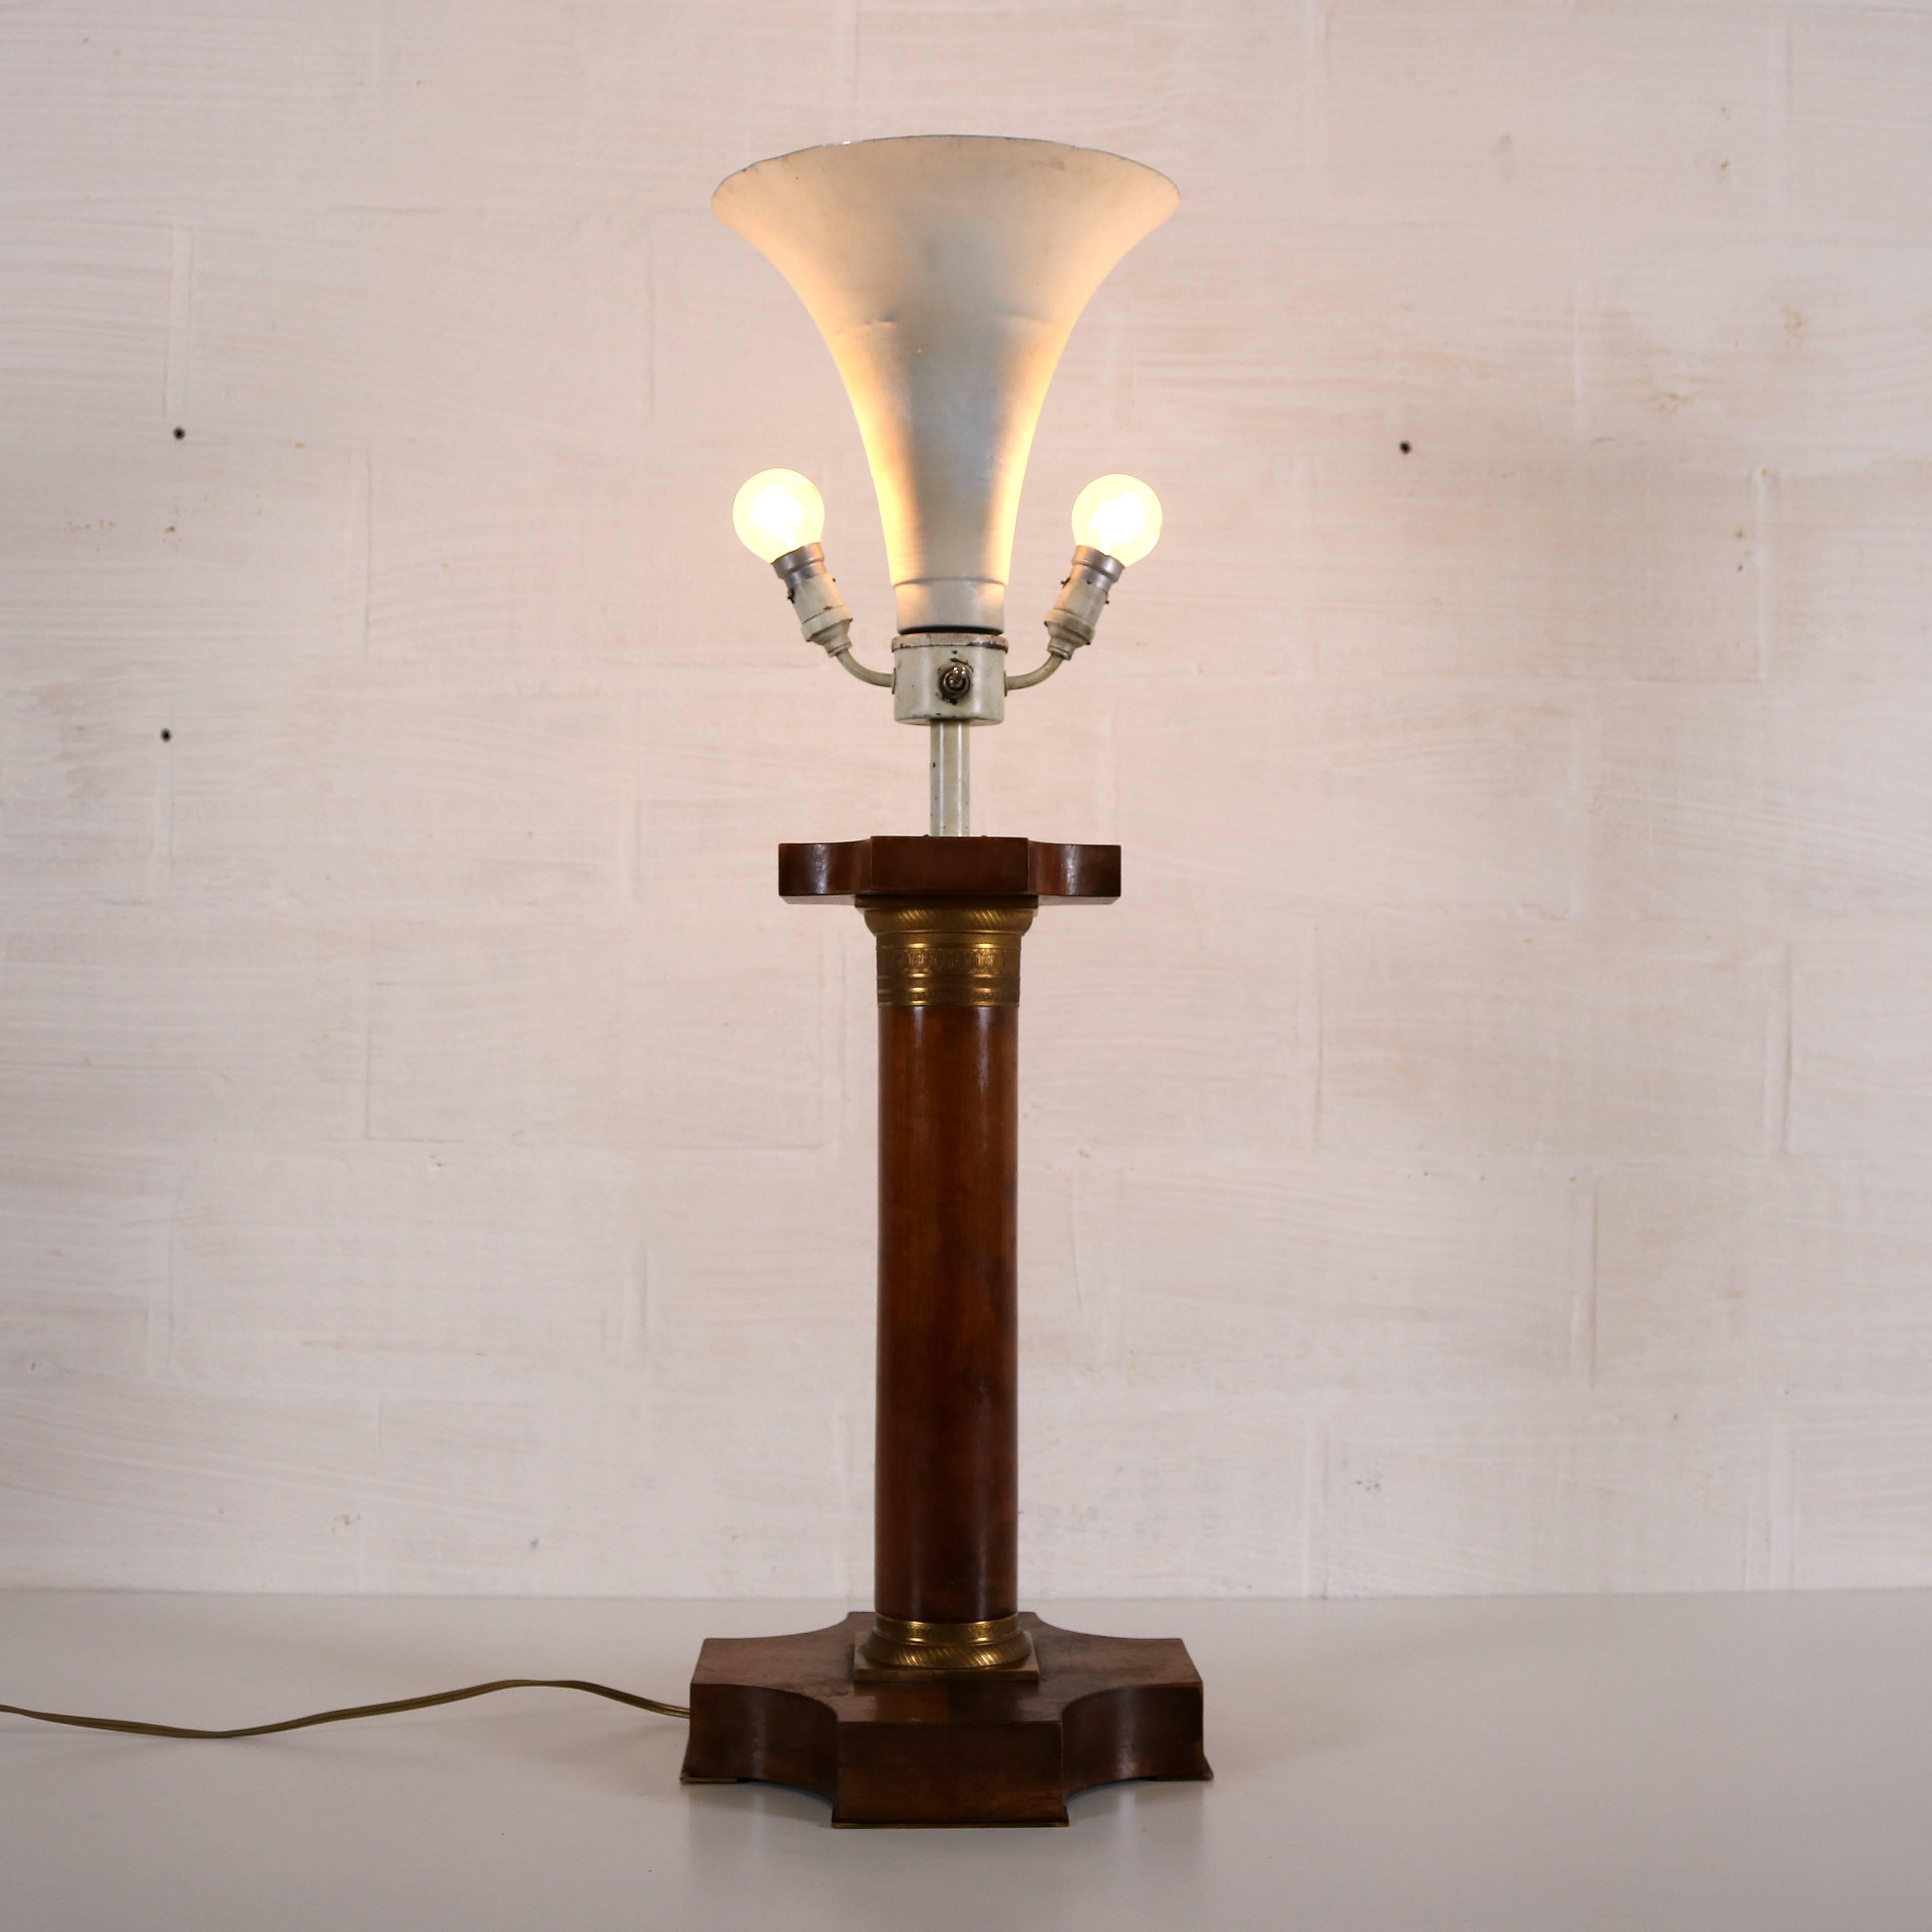 Art Deco lamp with Corinthian pillar.
Is made out of wood and metal.
The lamps can burn separately.

Dimensions:
Height 80 cm
Foot diameter 26 cm
Lamp diameter 24 cm.